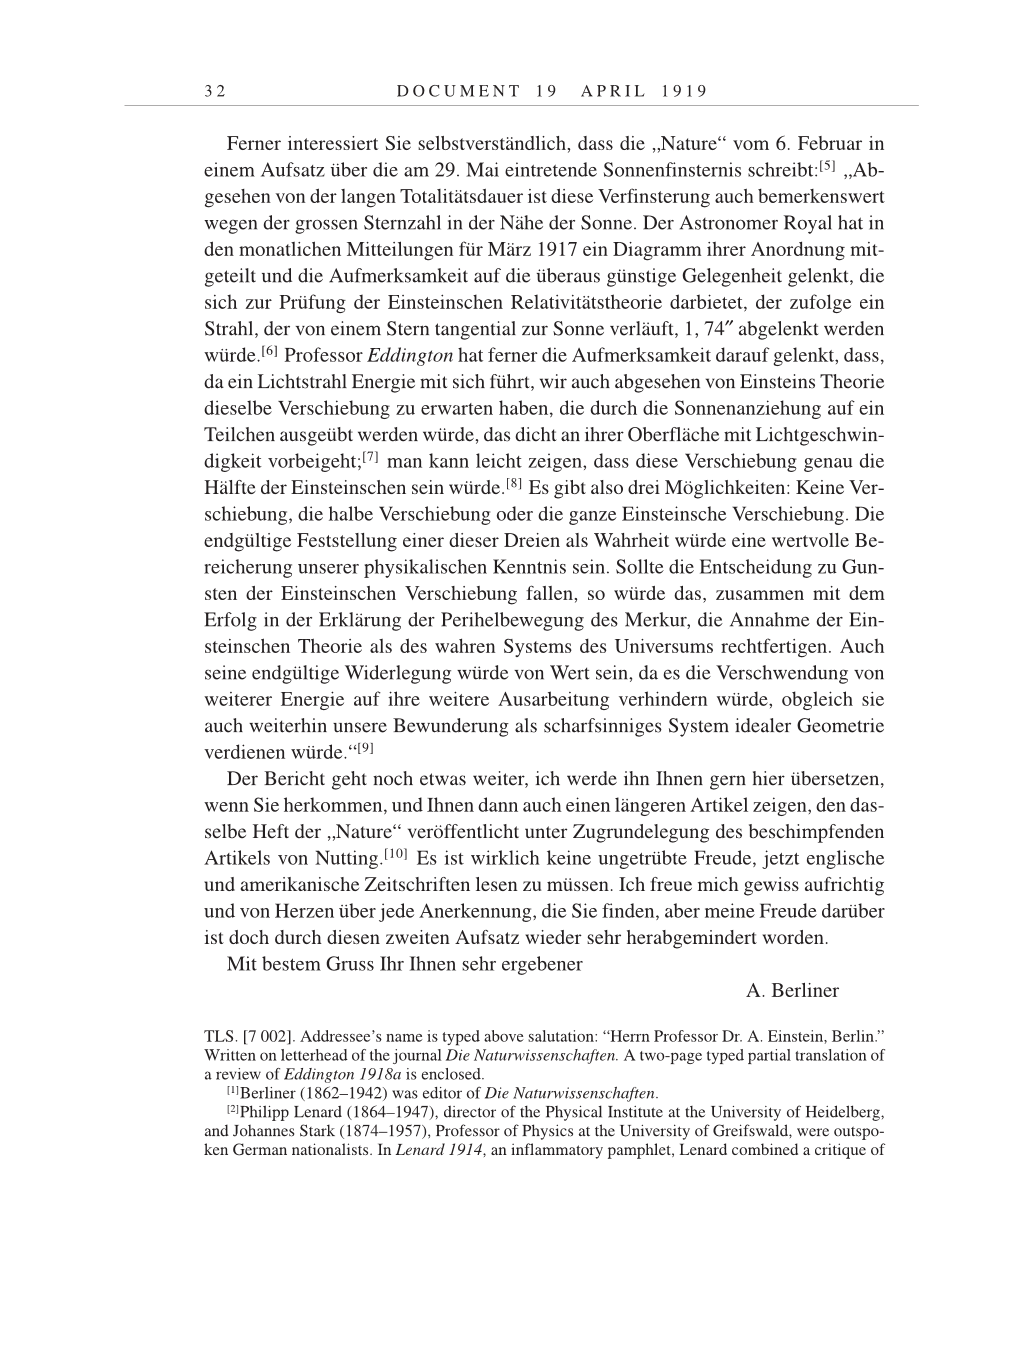 Volume 9: The Berlin Years: Correspondence January 1919-April 1920 page 32